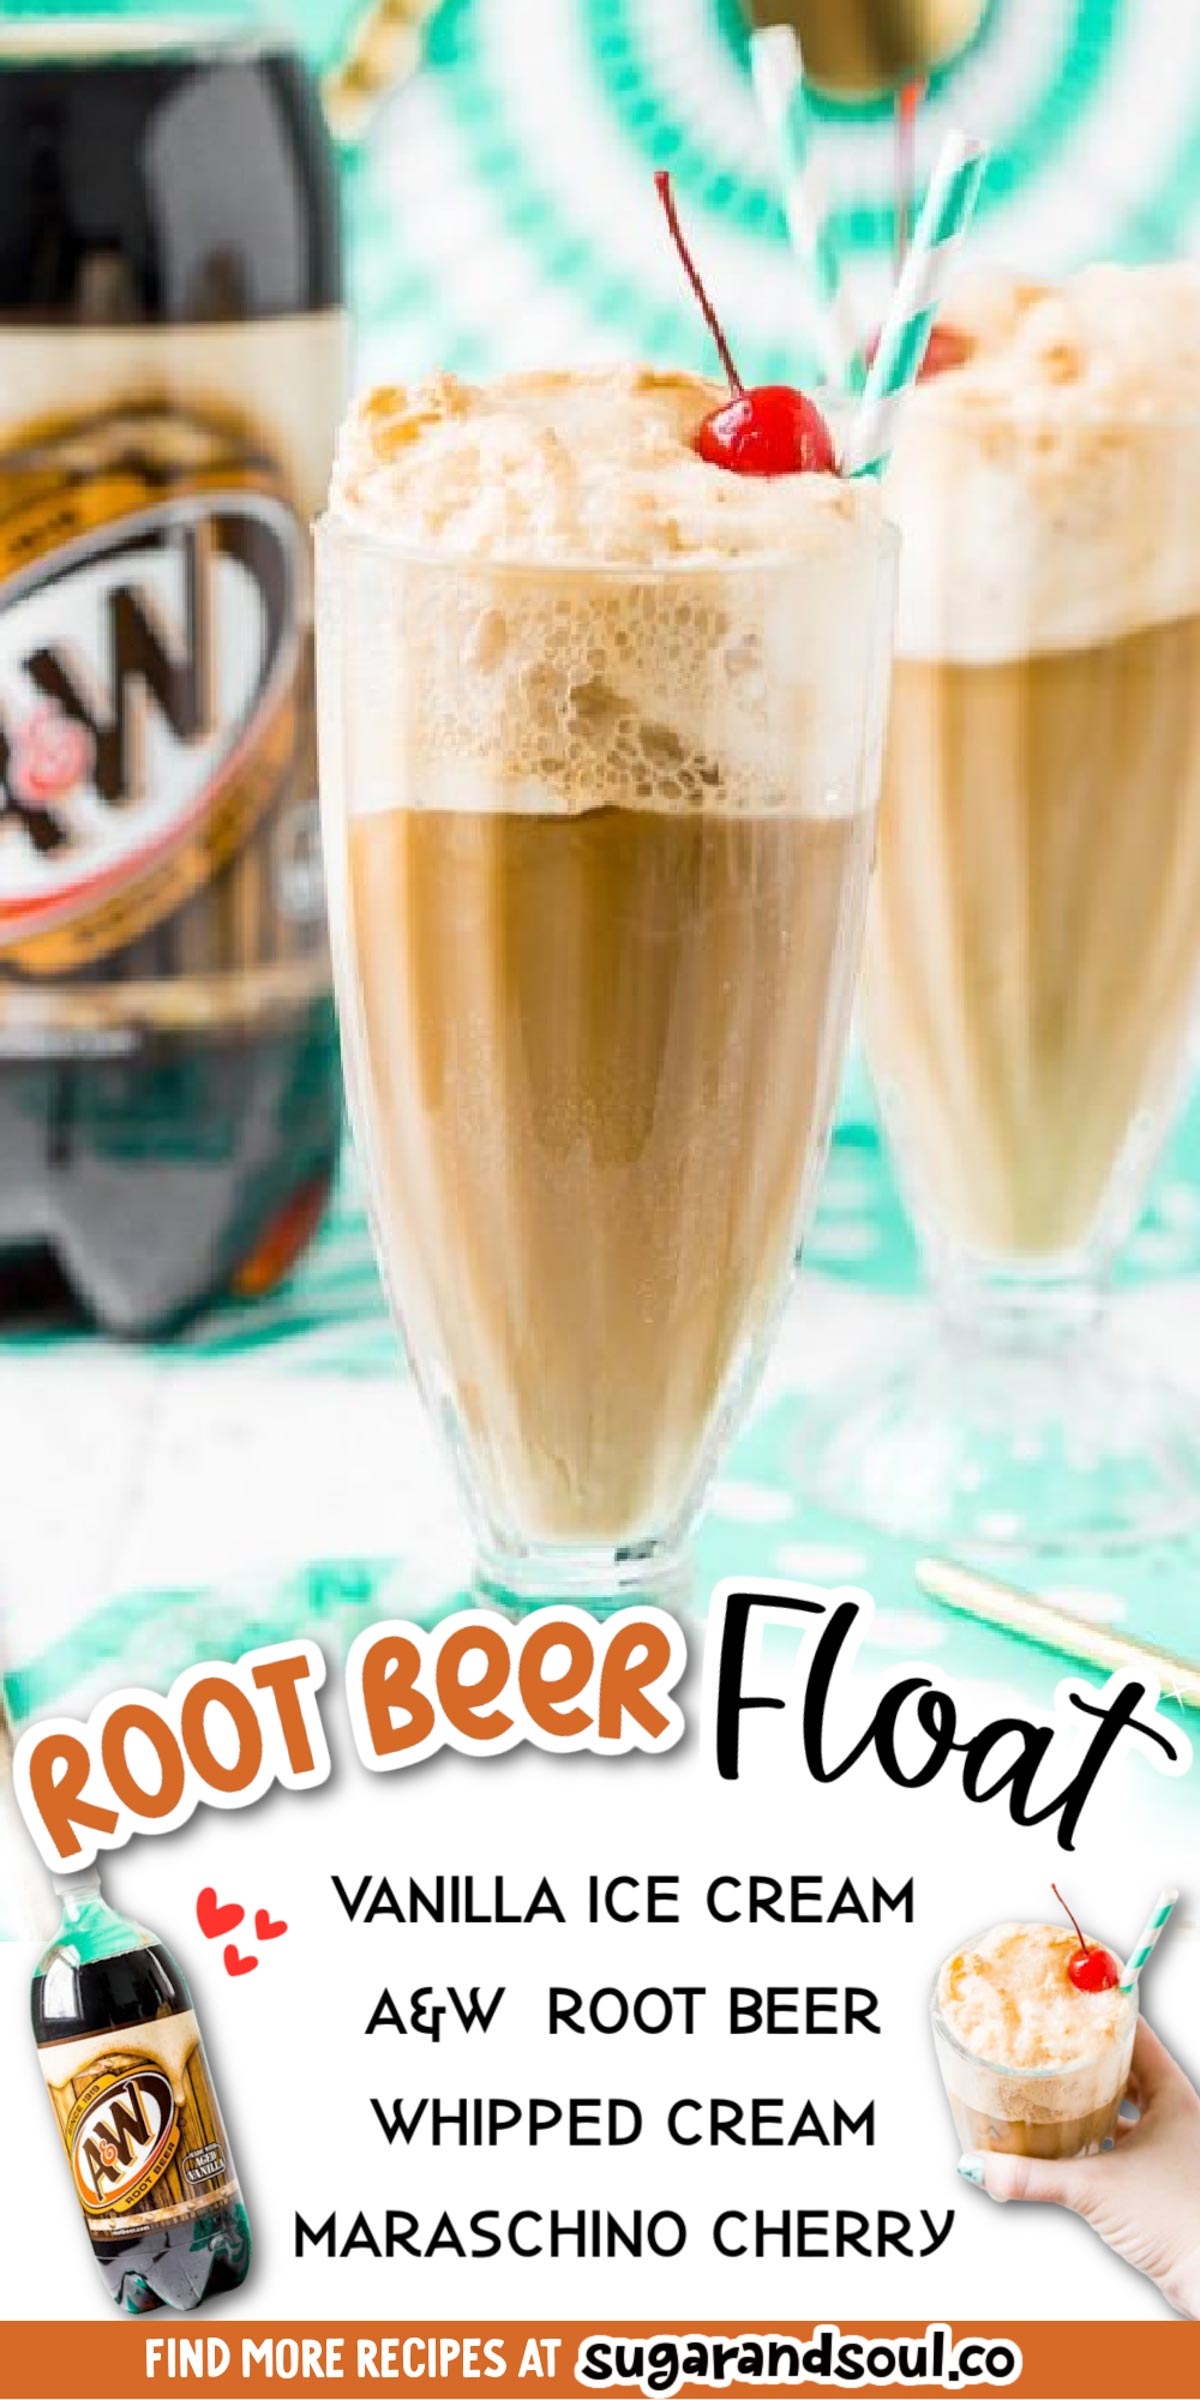 Everyone loves a good A&W® Root Beer Float - a classic and fun drink recipe made with bubbly root beer, creamy vanilla ice cream, and a few other ingredients that takes it over the top! Here's how to make the absolute BEST one! via @sugarandsoulco